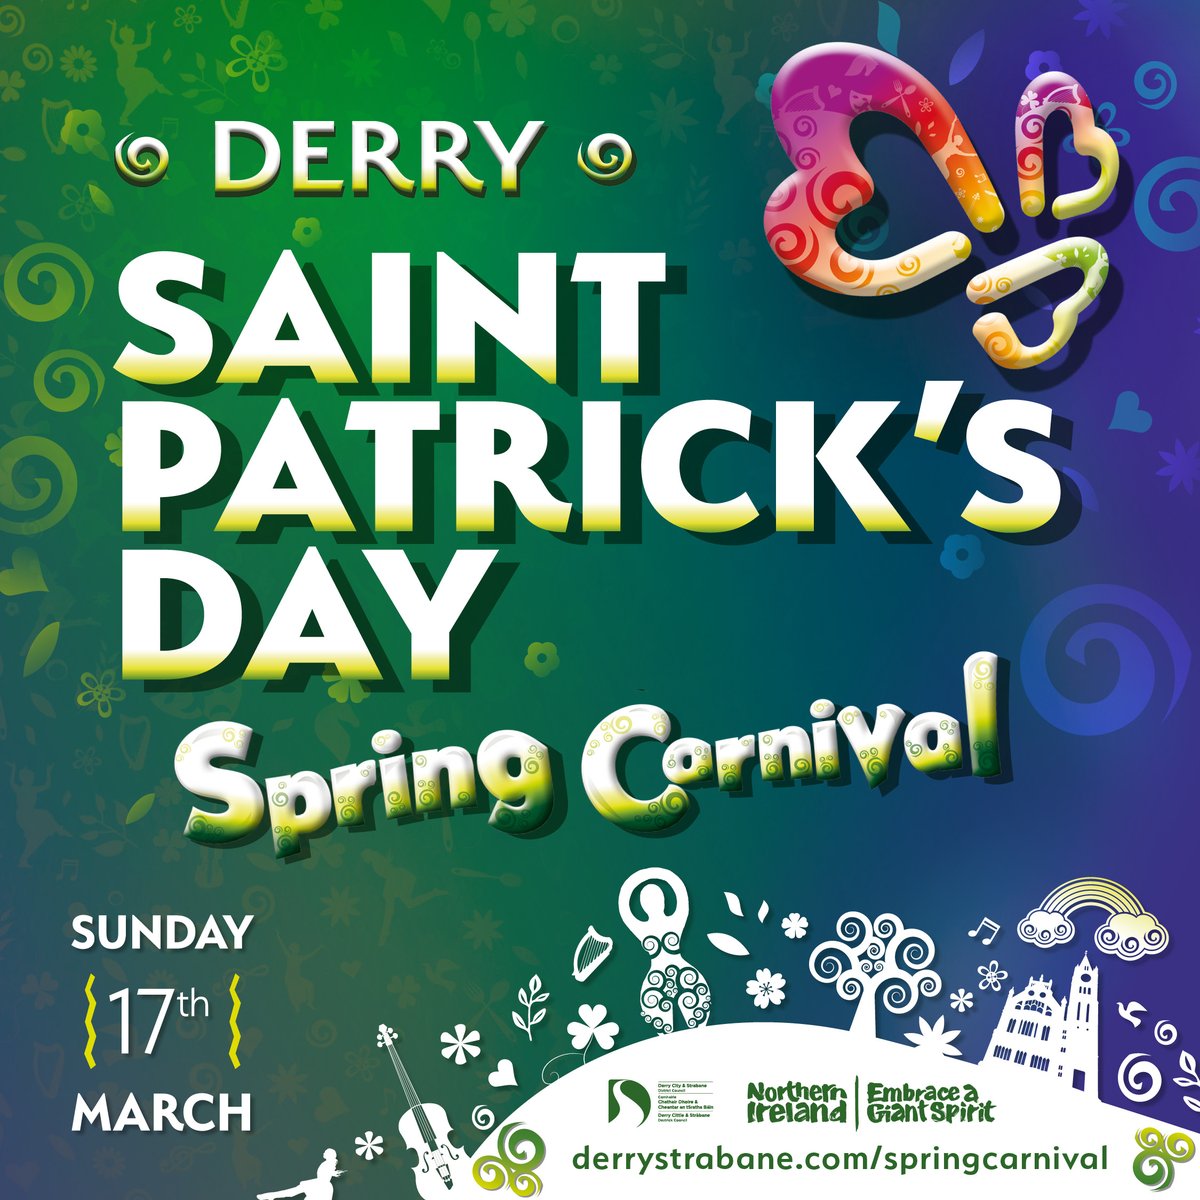 The countdown to the Spring Carnival has begun Celebrate the arrival of Spring in all its colourful splendour with a magical programme of music, dance, food and folklore this St Patrick's Day☘️ Full Programme👉 bit.ly/3IlXbFg #VisitDerry #StPatricksDay #SpringCarnival